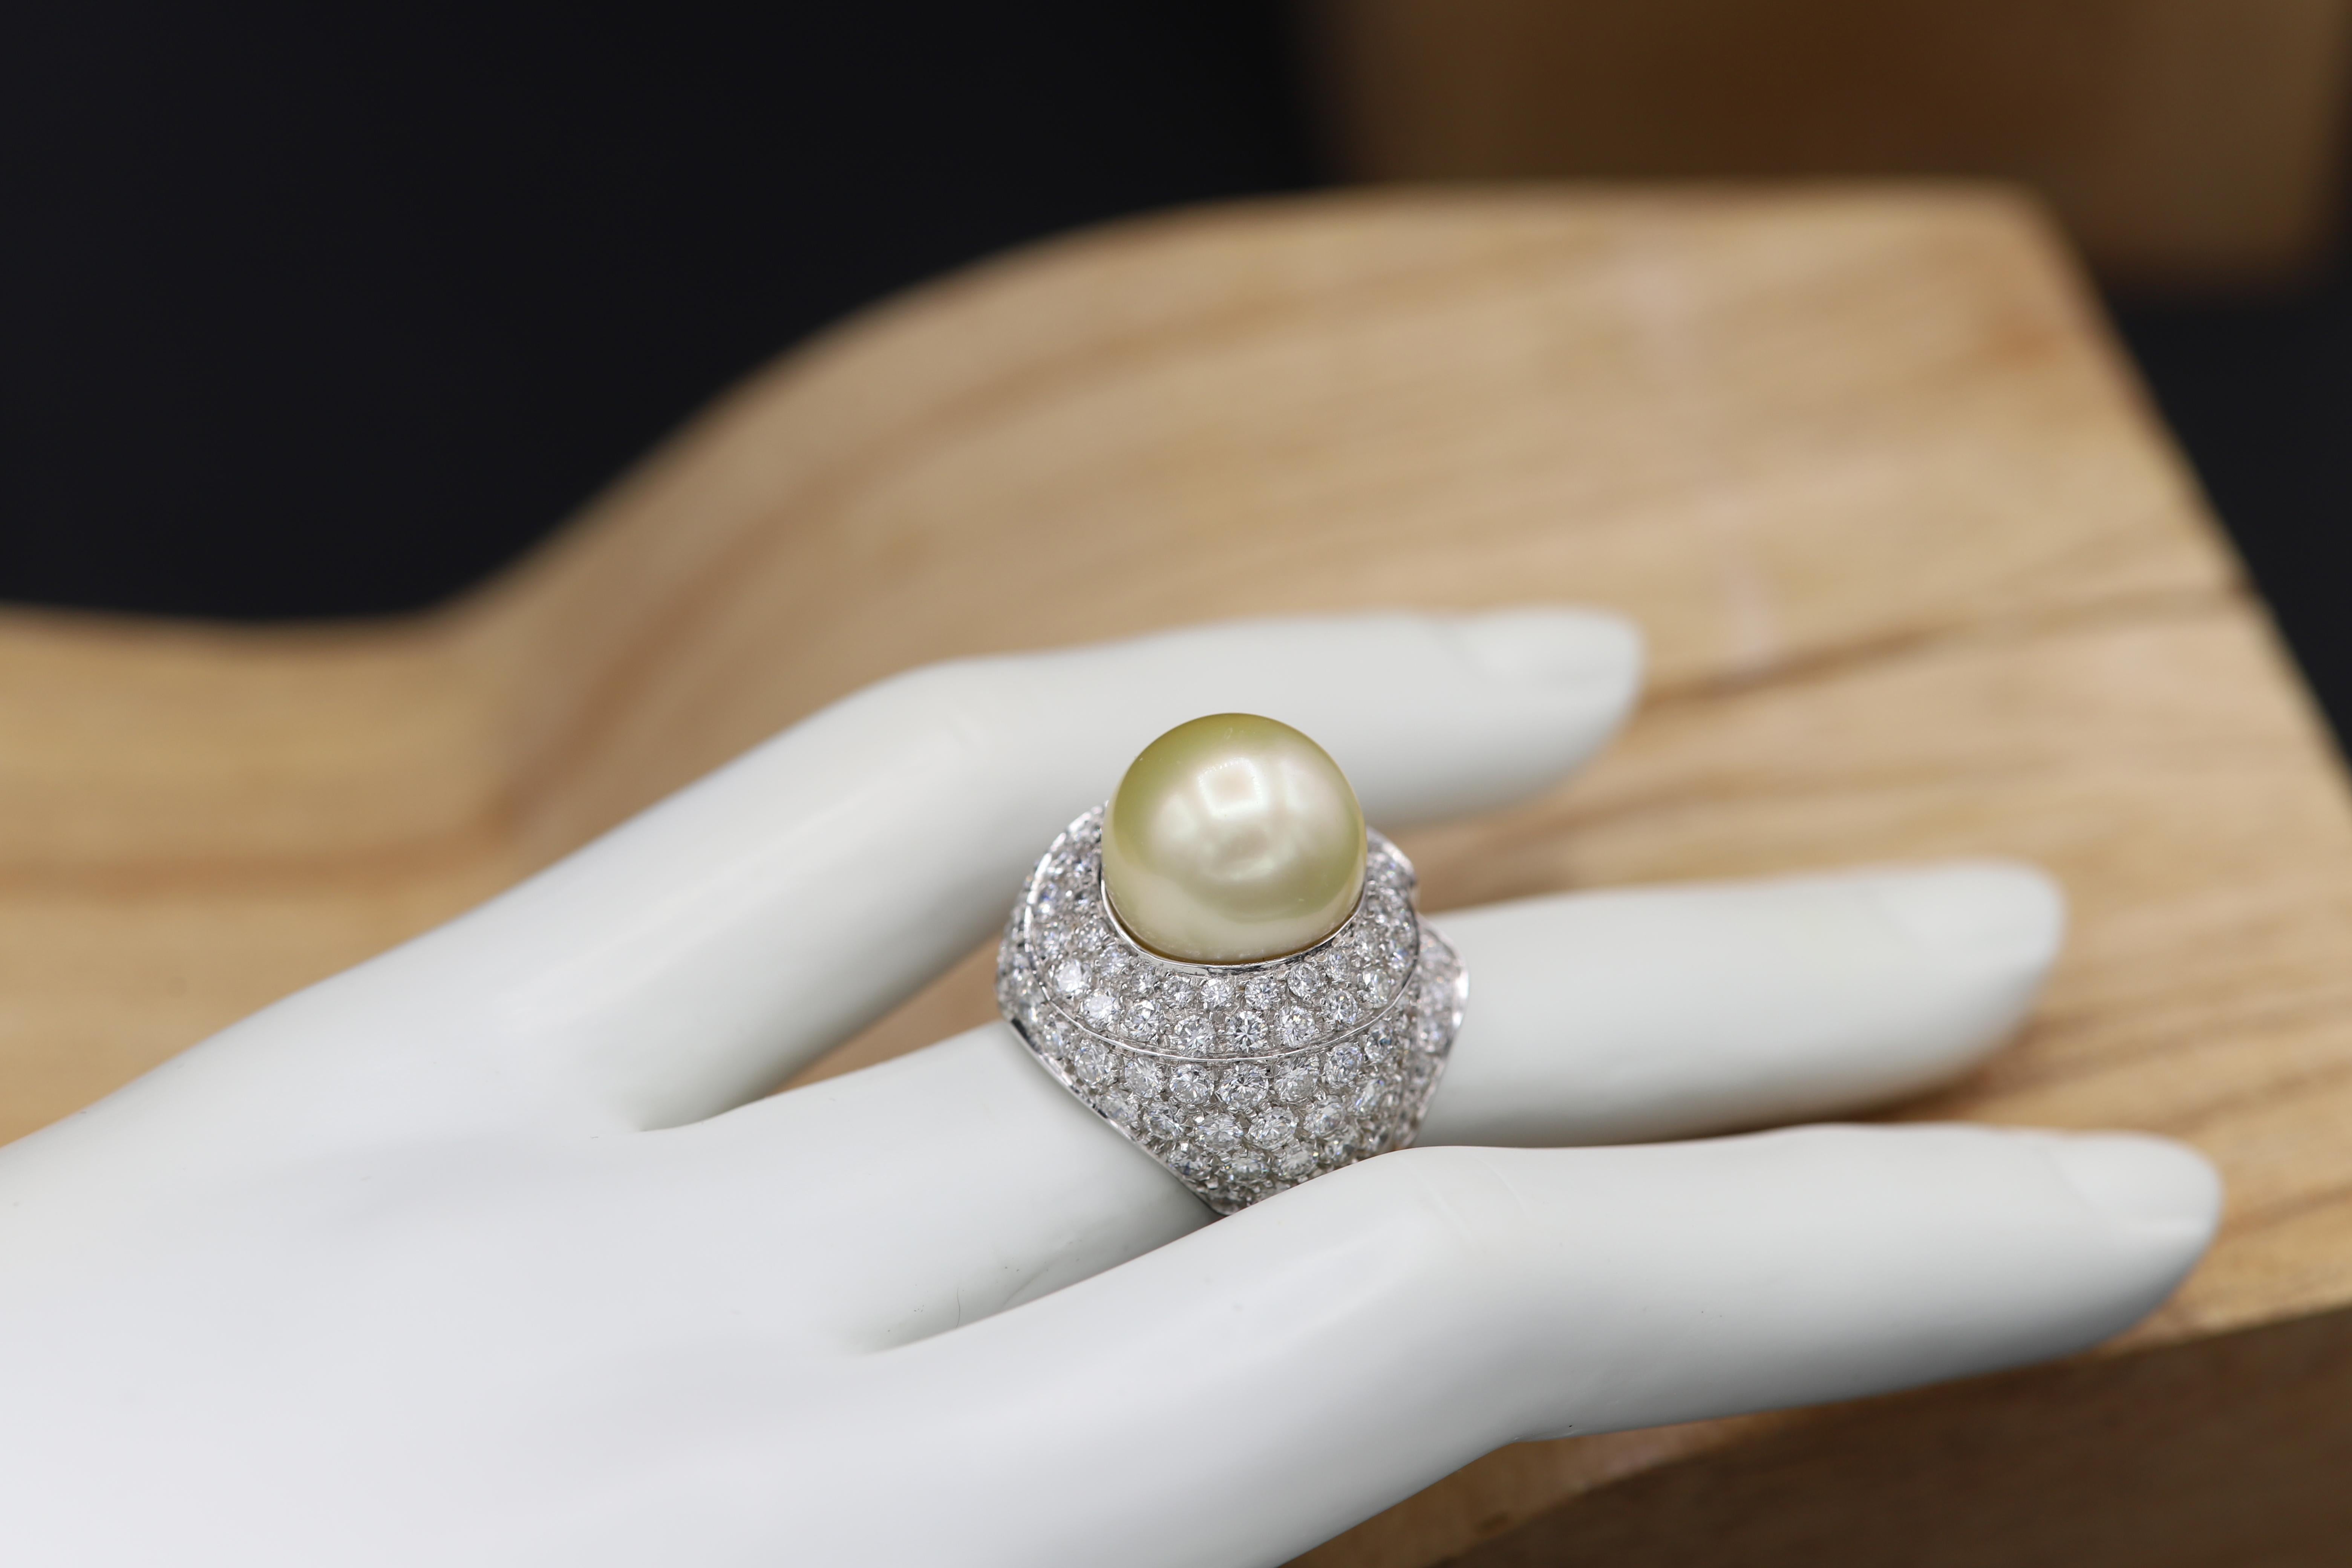 Impressive large Pearl and large diamond ring, 
14mm yellow/golden pearl from south sea.
18k white gold 15 grams,
Round Natural Diamonds Total 5.0 carat G- VS.
Finger size 6.75
resizable: only a little bit up or down
(#249 Liq 19448519)
